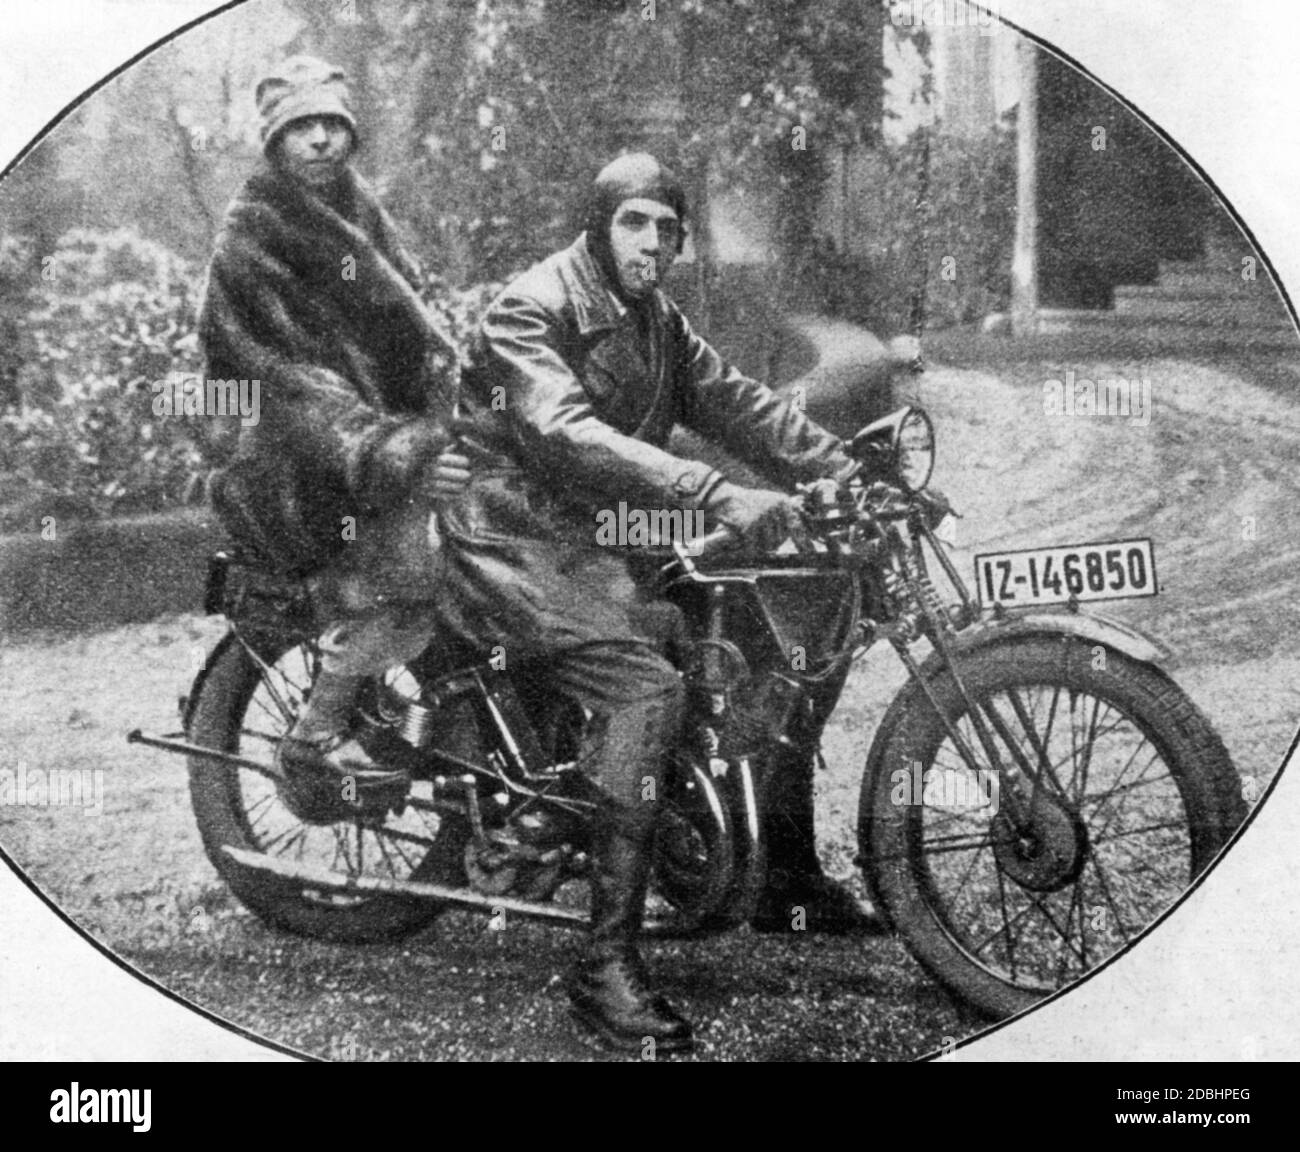 Viktoria (born of Prussia, then Princess of Schaumburg-Lippe and in second marriage Zoubkoff) sits on a motorcycle with her husband, the Russian emigrant Alexander Zoubkoff. The couple was only married for a few months and lived in Bonn. The license plate number of the motorcycle starts with I Z, which stands for the Rhine province, which belonged to Prussia. Stock Photo